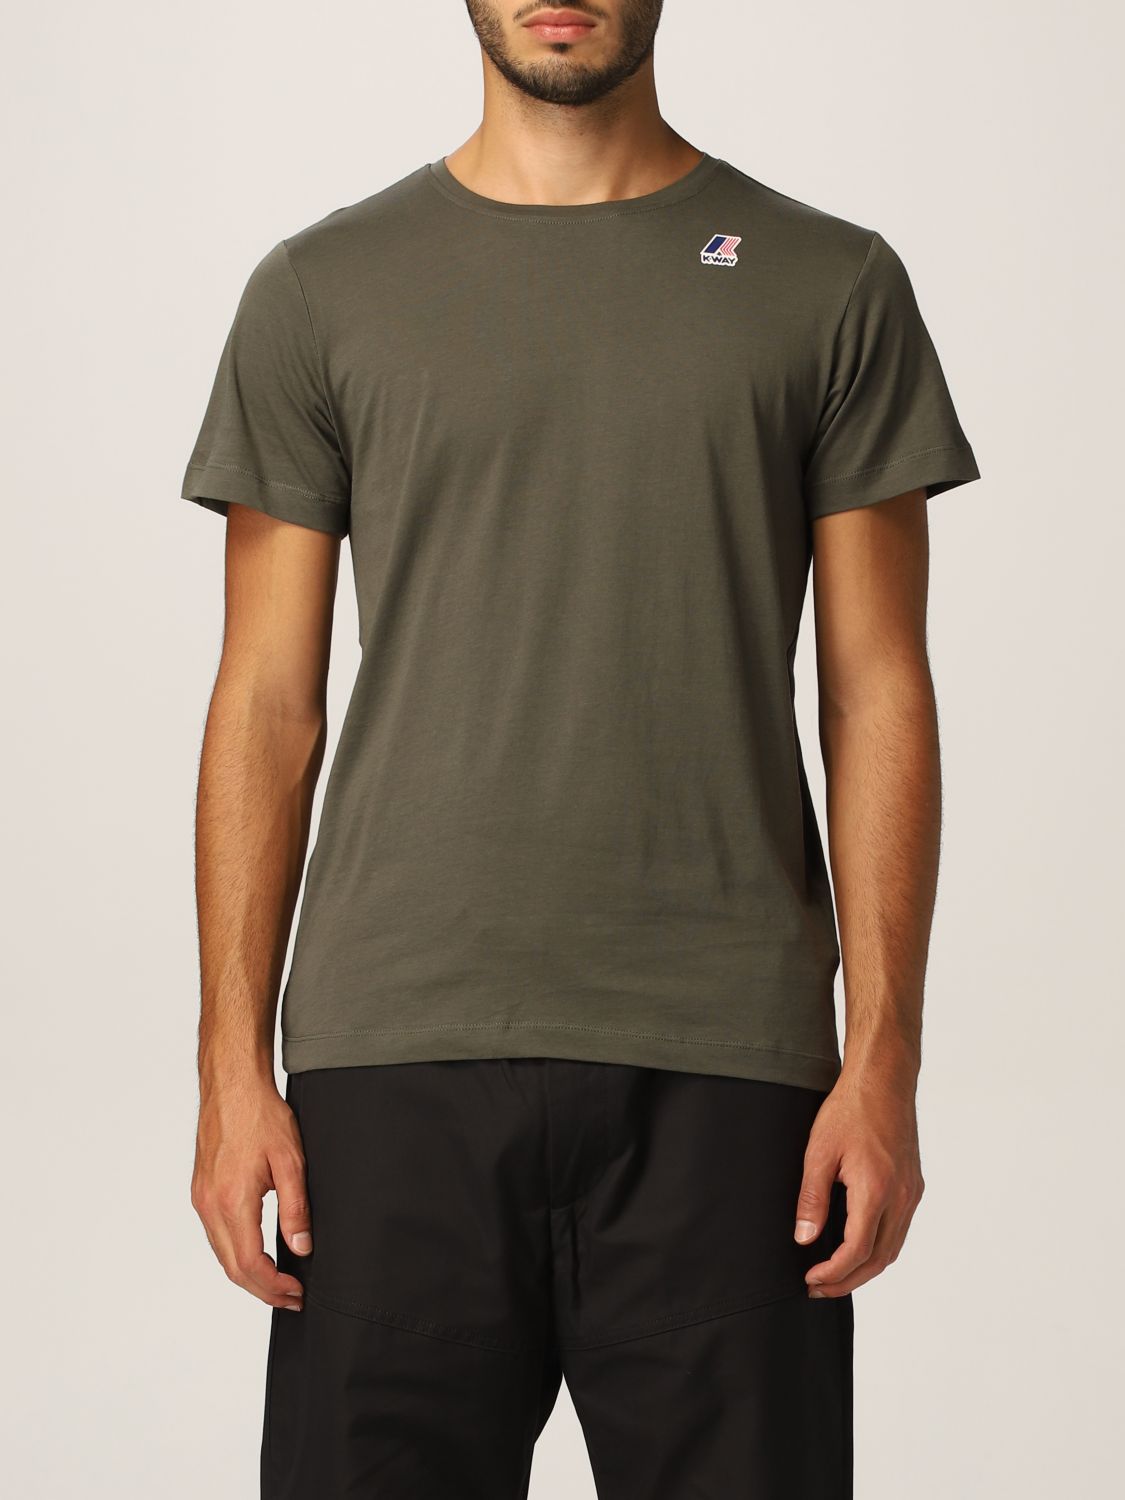 K-WAY: t-shirt for man - Military | K-Way t-shirt K007JE0 online on ...